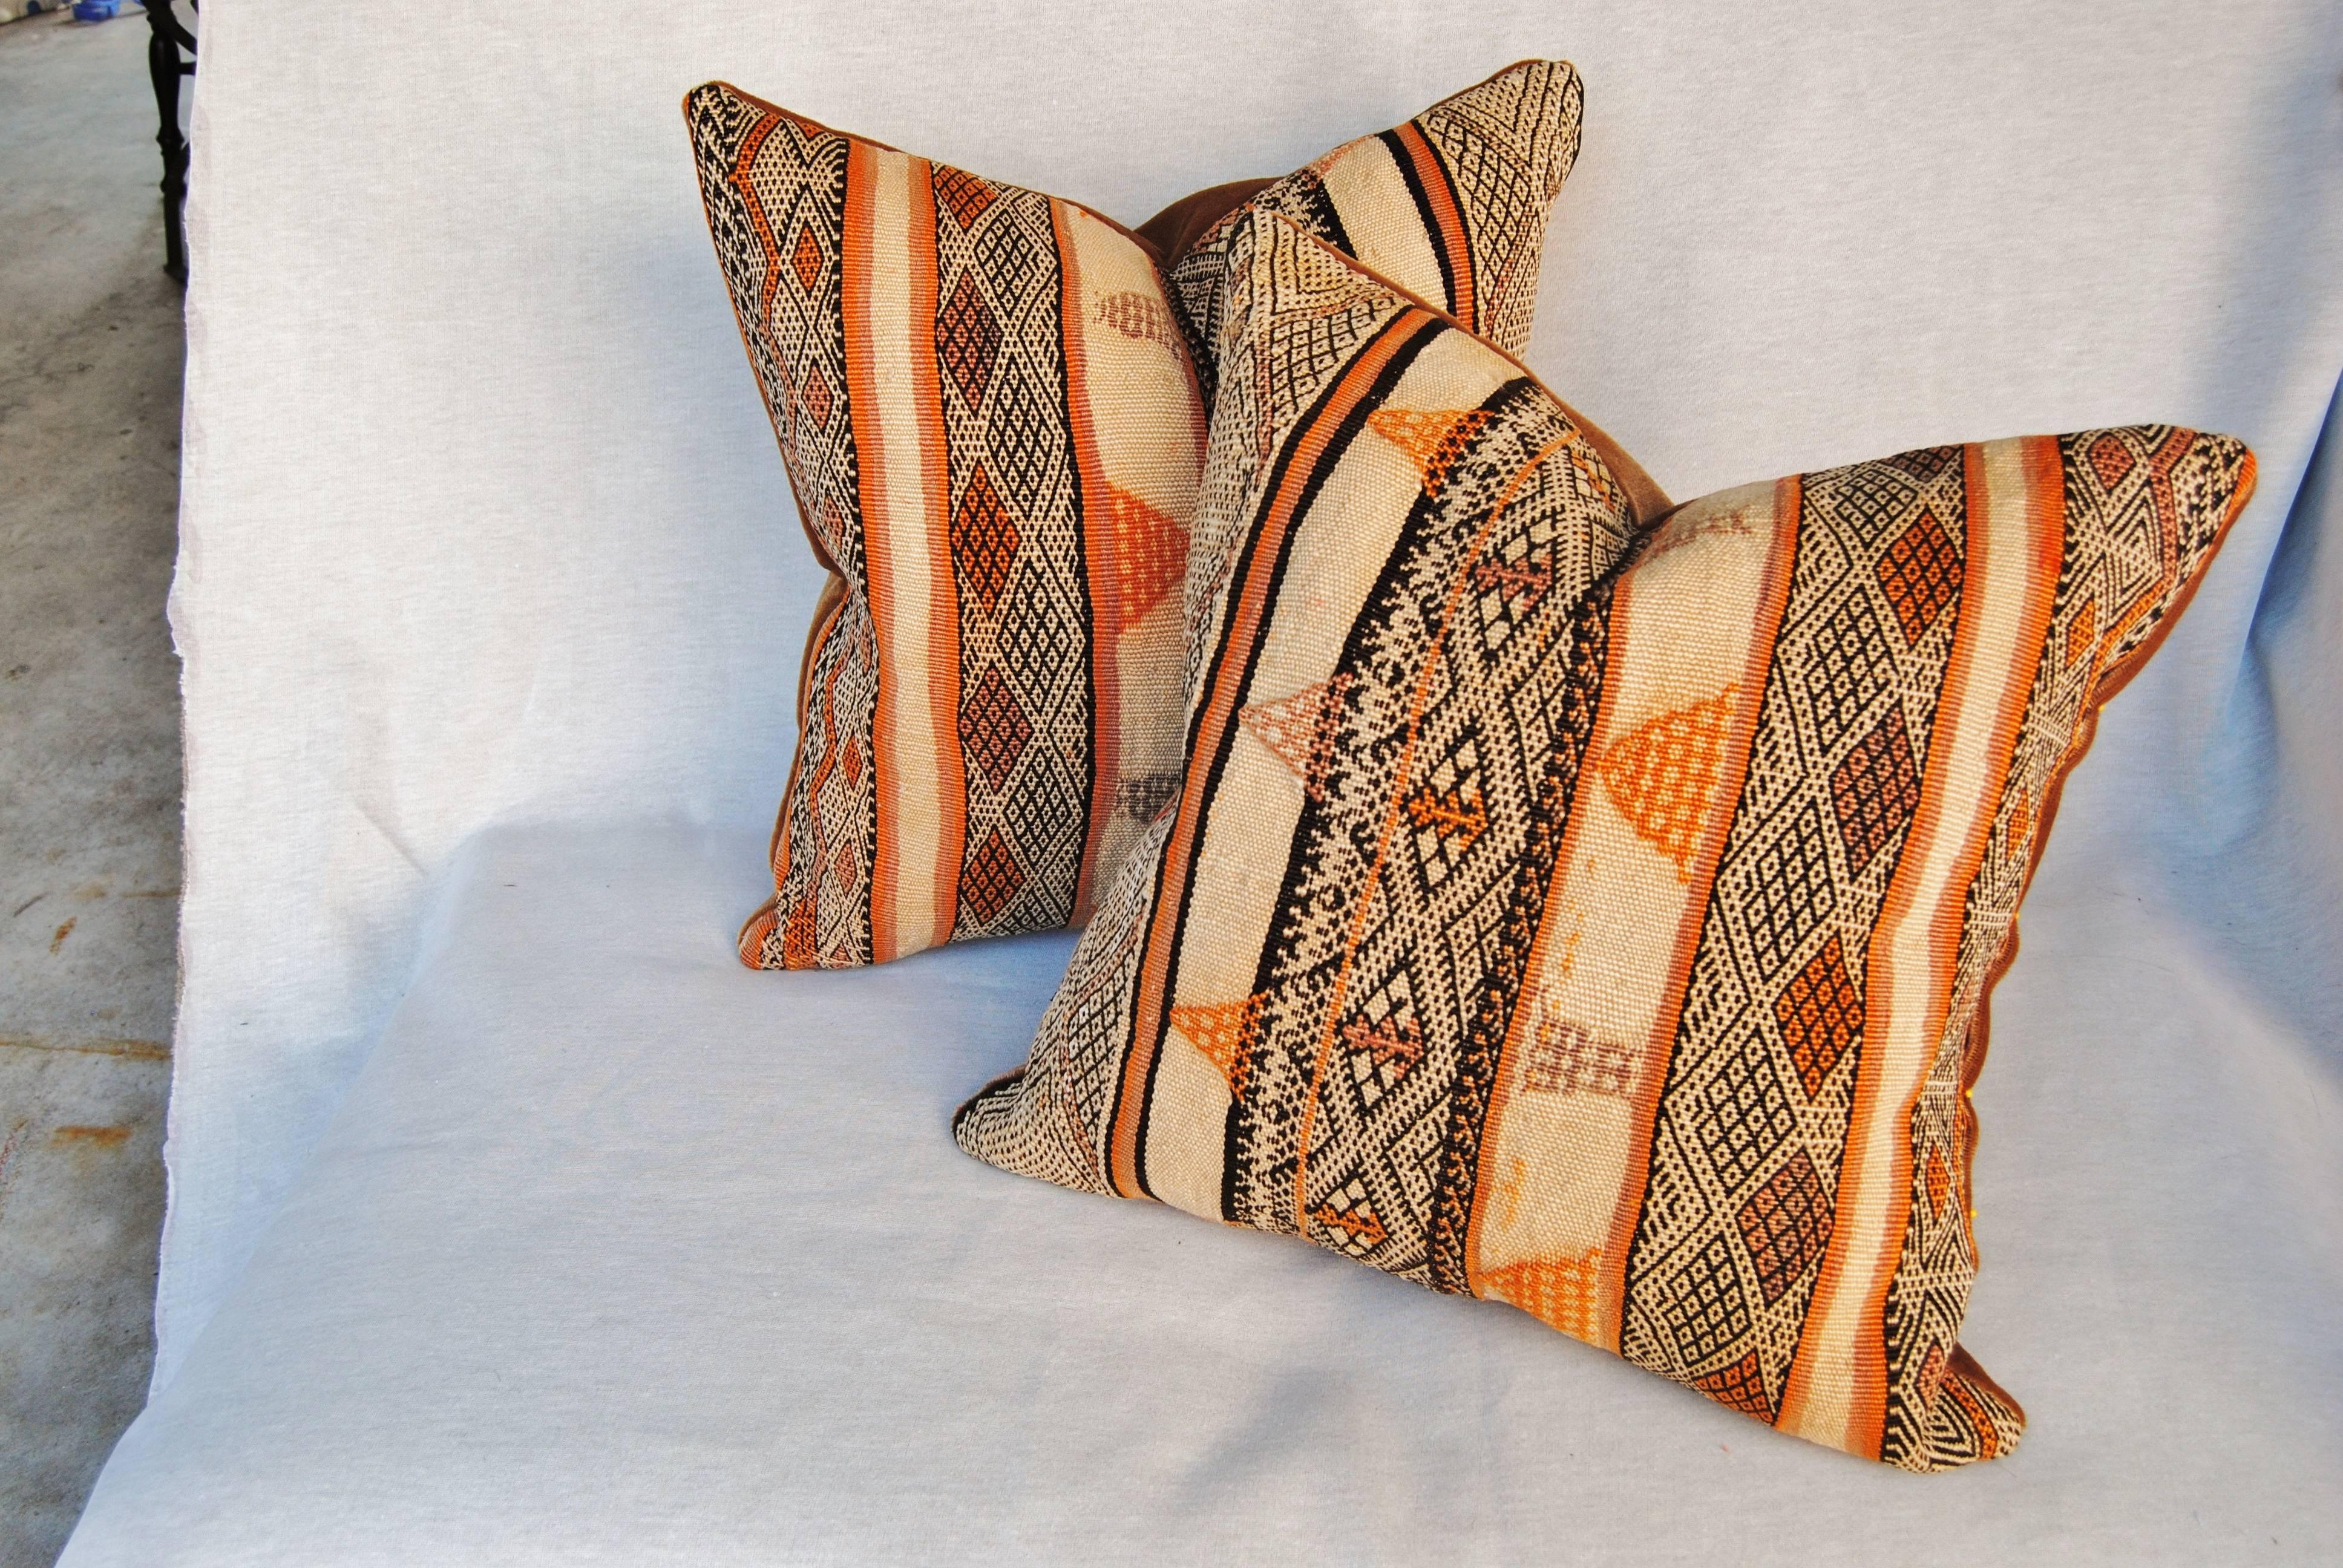 Custom pillow cut from a vintage hand-loomed wool Moroccan rug made by the Berber women of the Atlas Mountains. This was a very heavy, thickly woven textile probably used as a storage bag for bed linens and clothing. Pillow is backed in a mustard